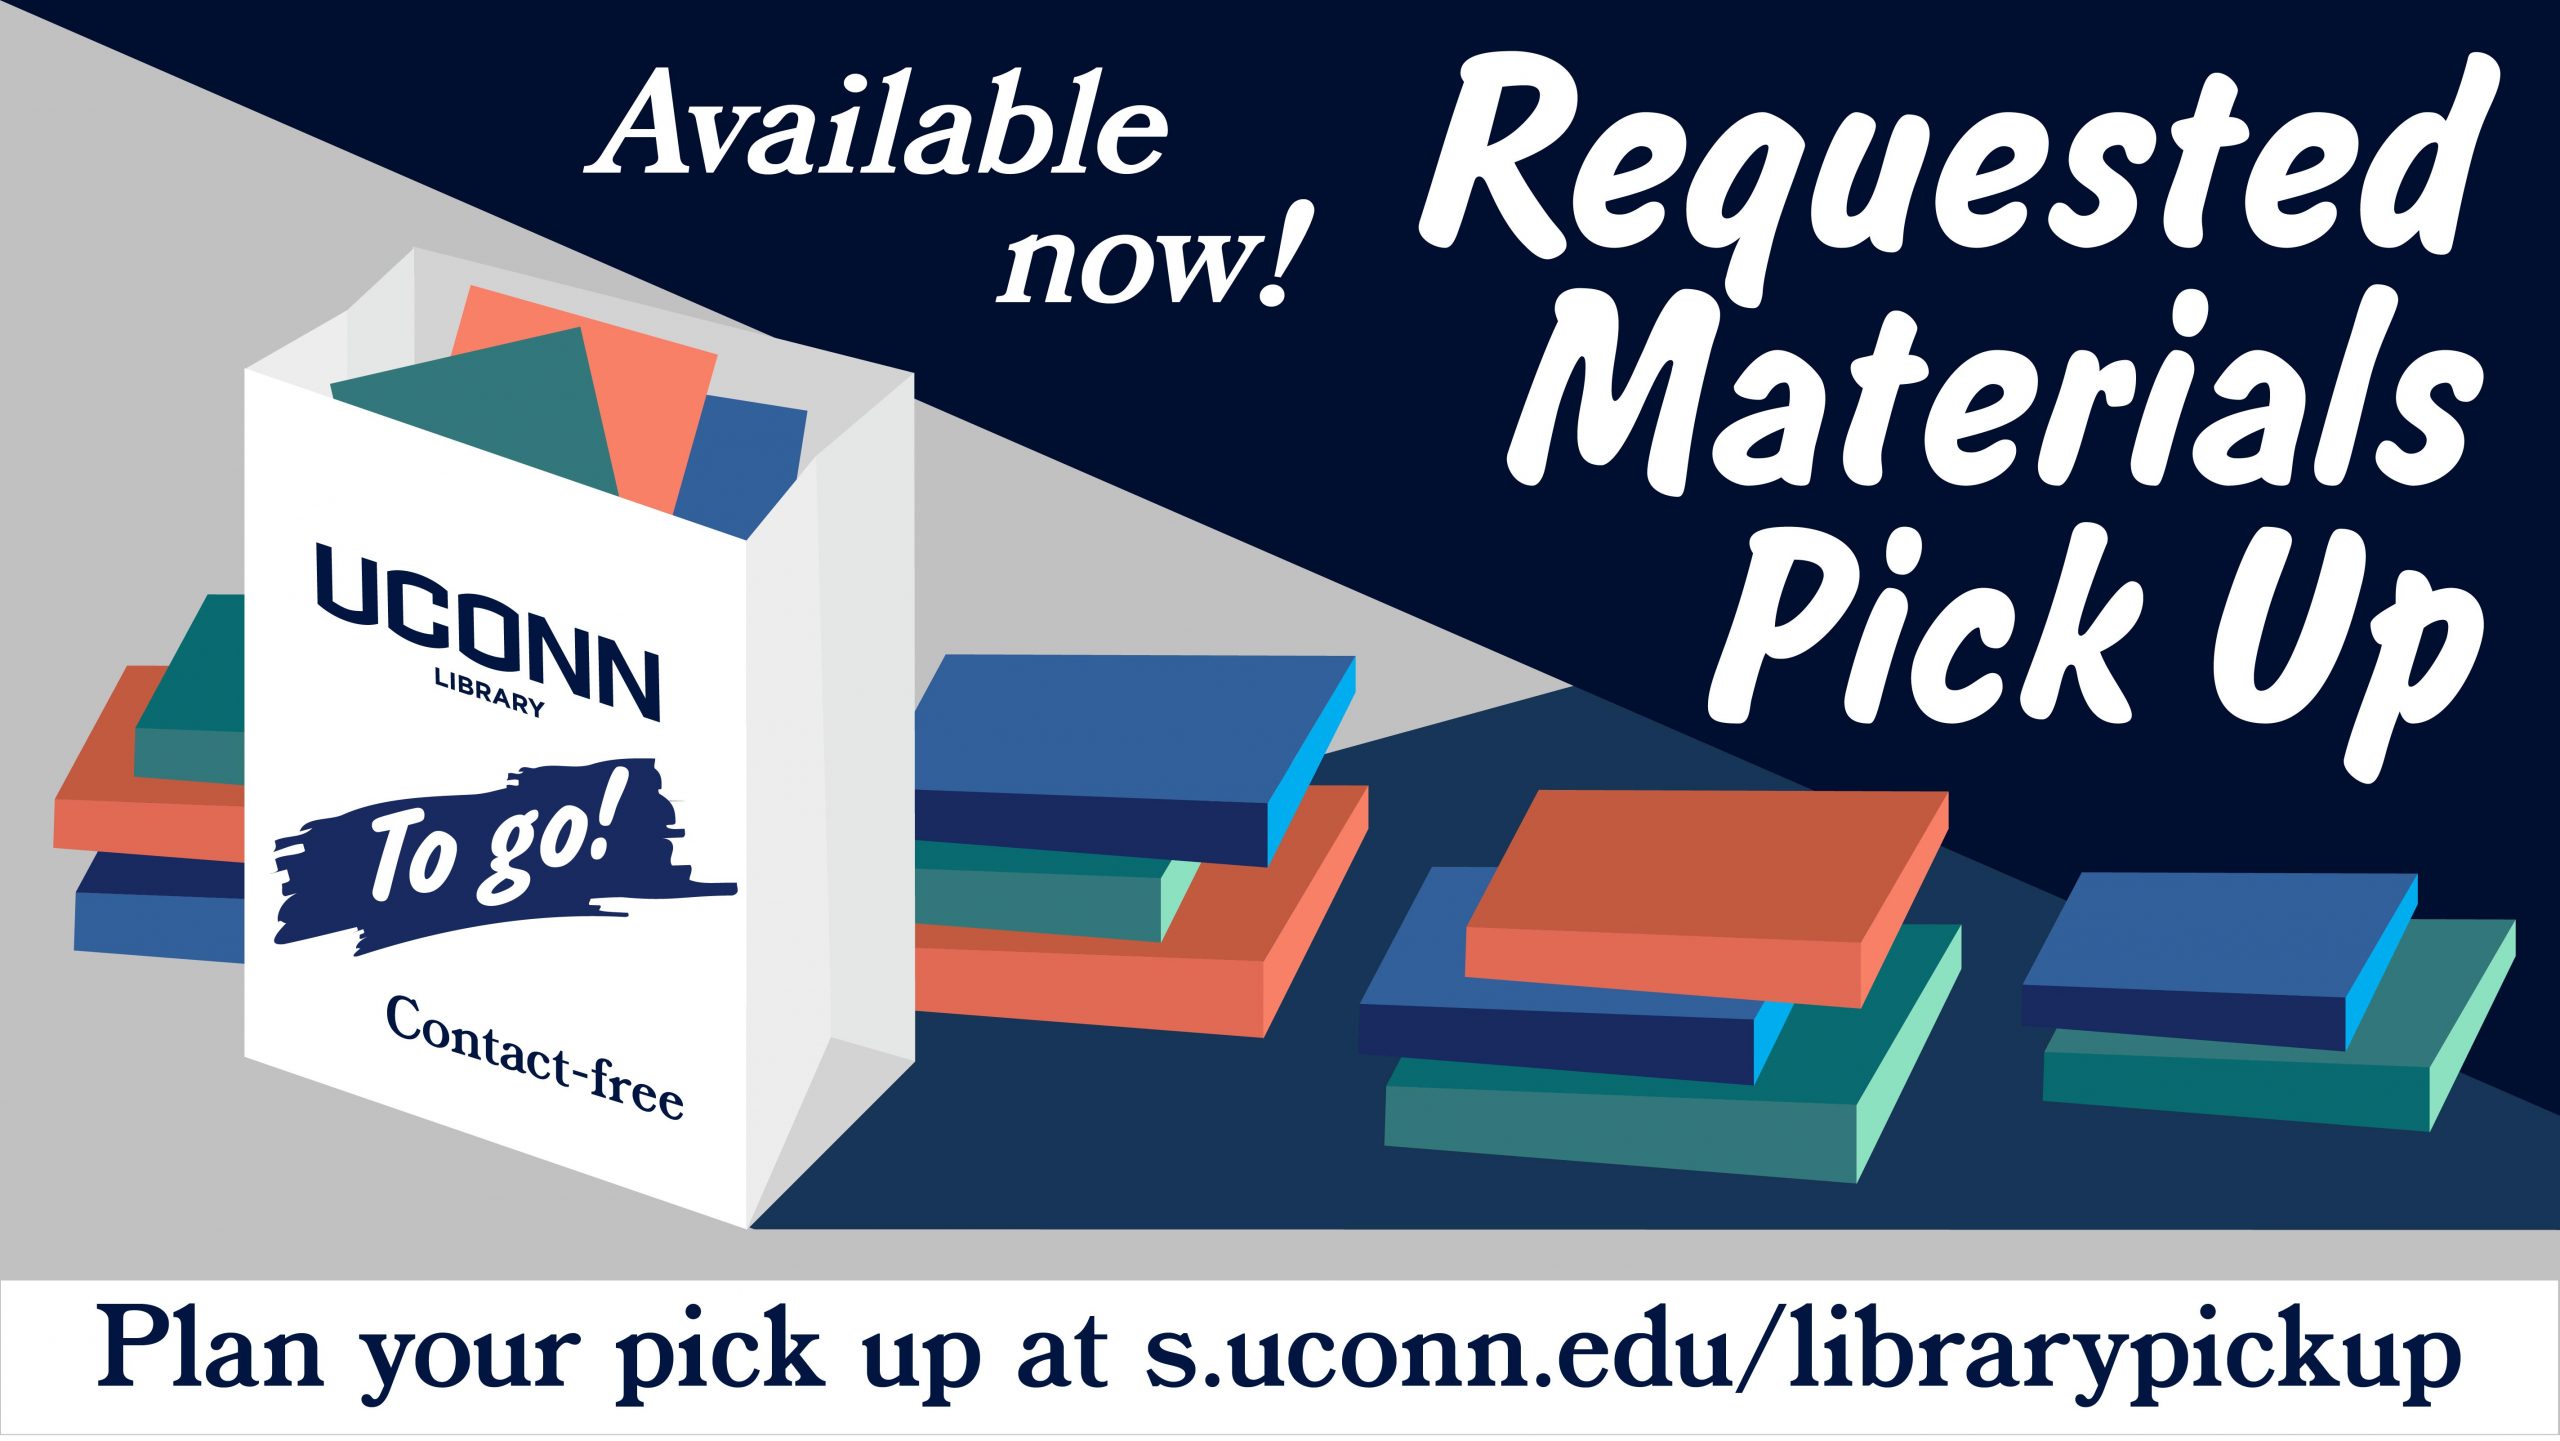 Requested Material Pick Up now available at s.uconn.edu/librarypickup